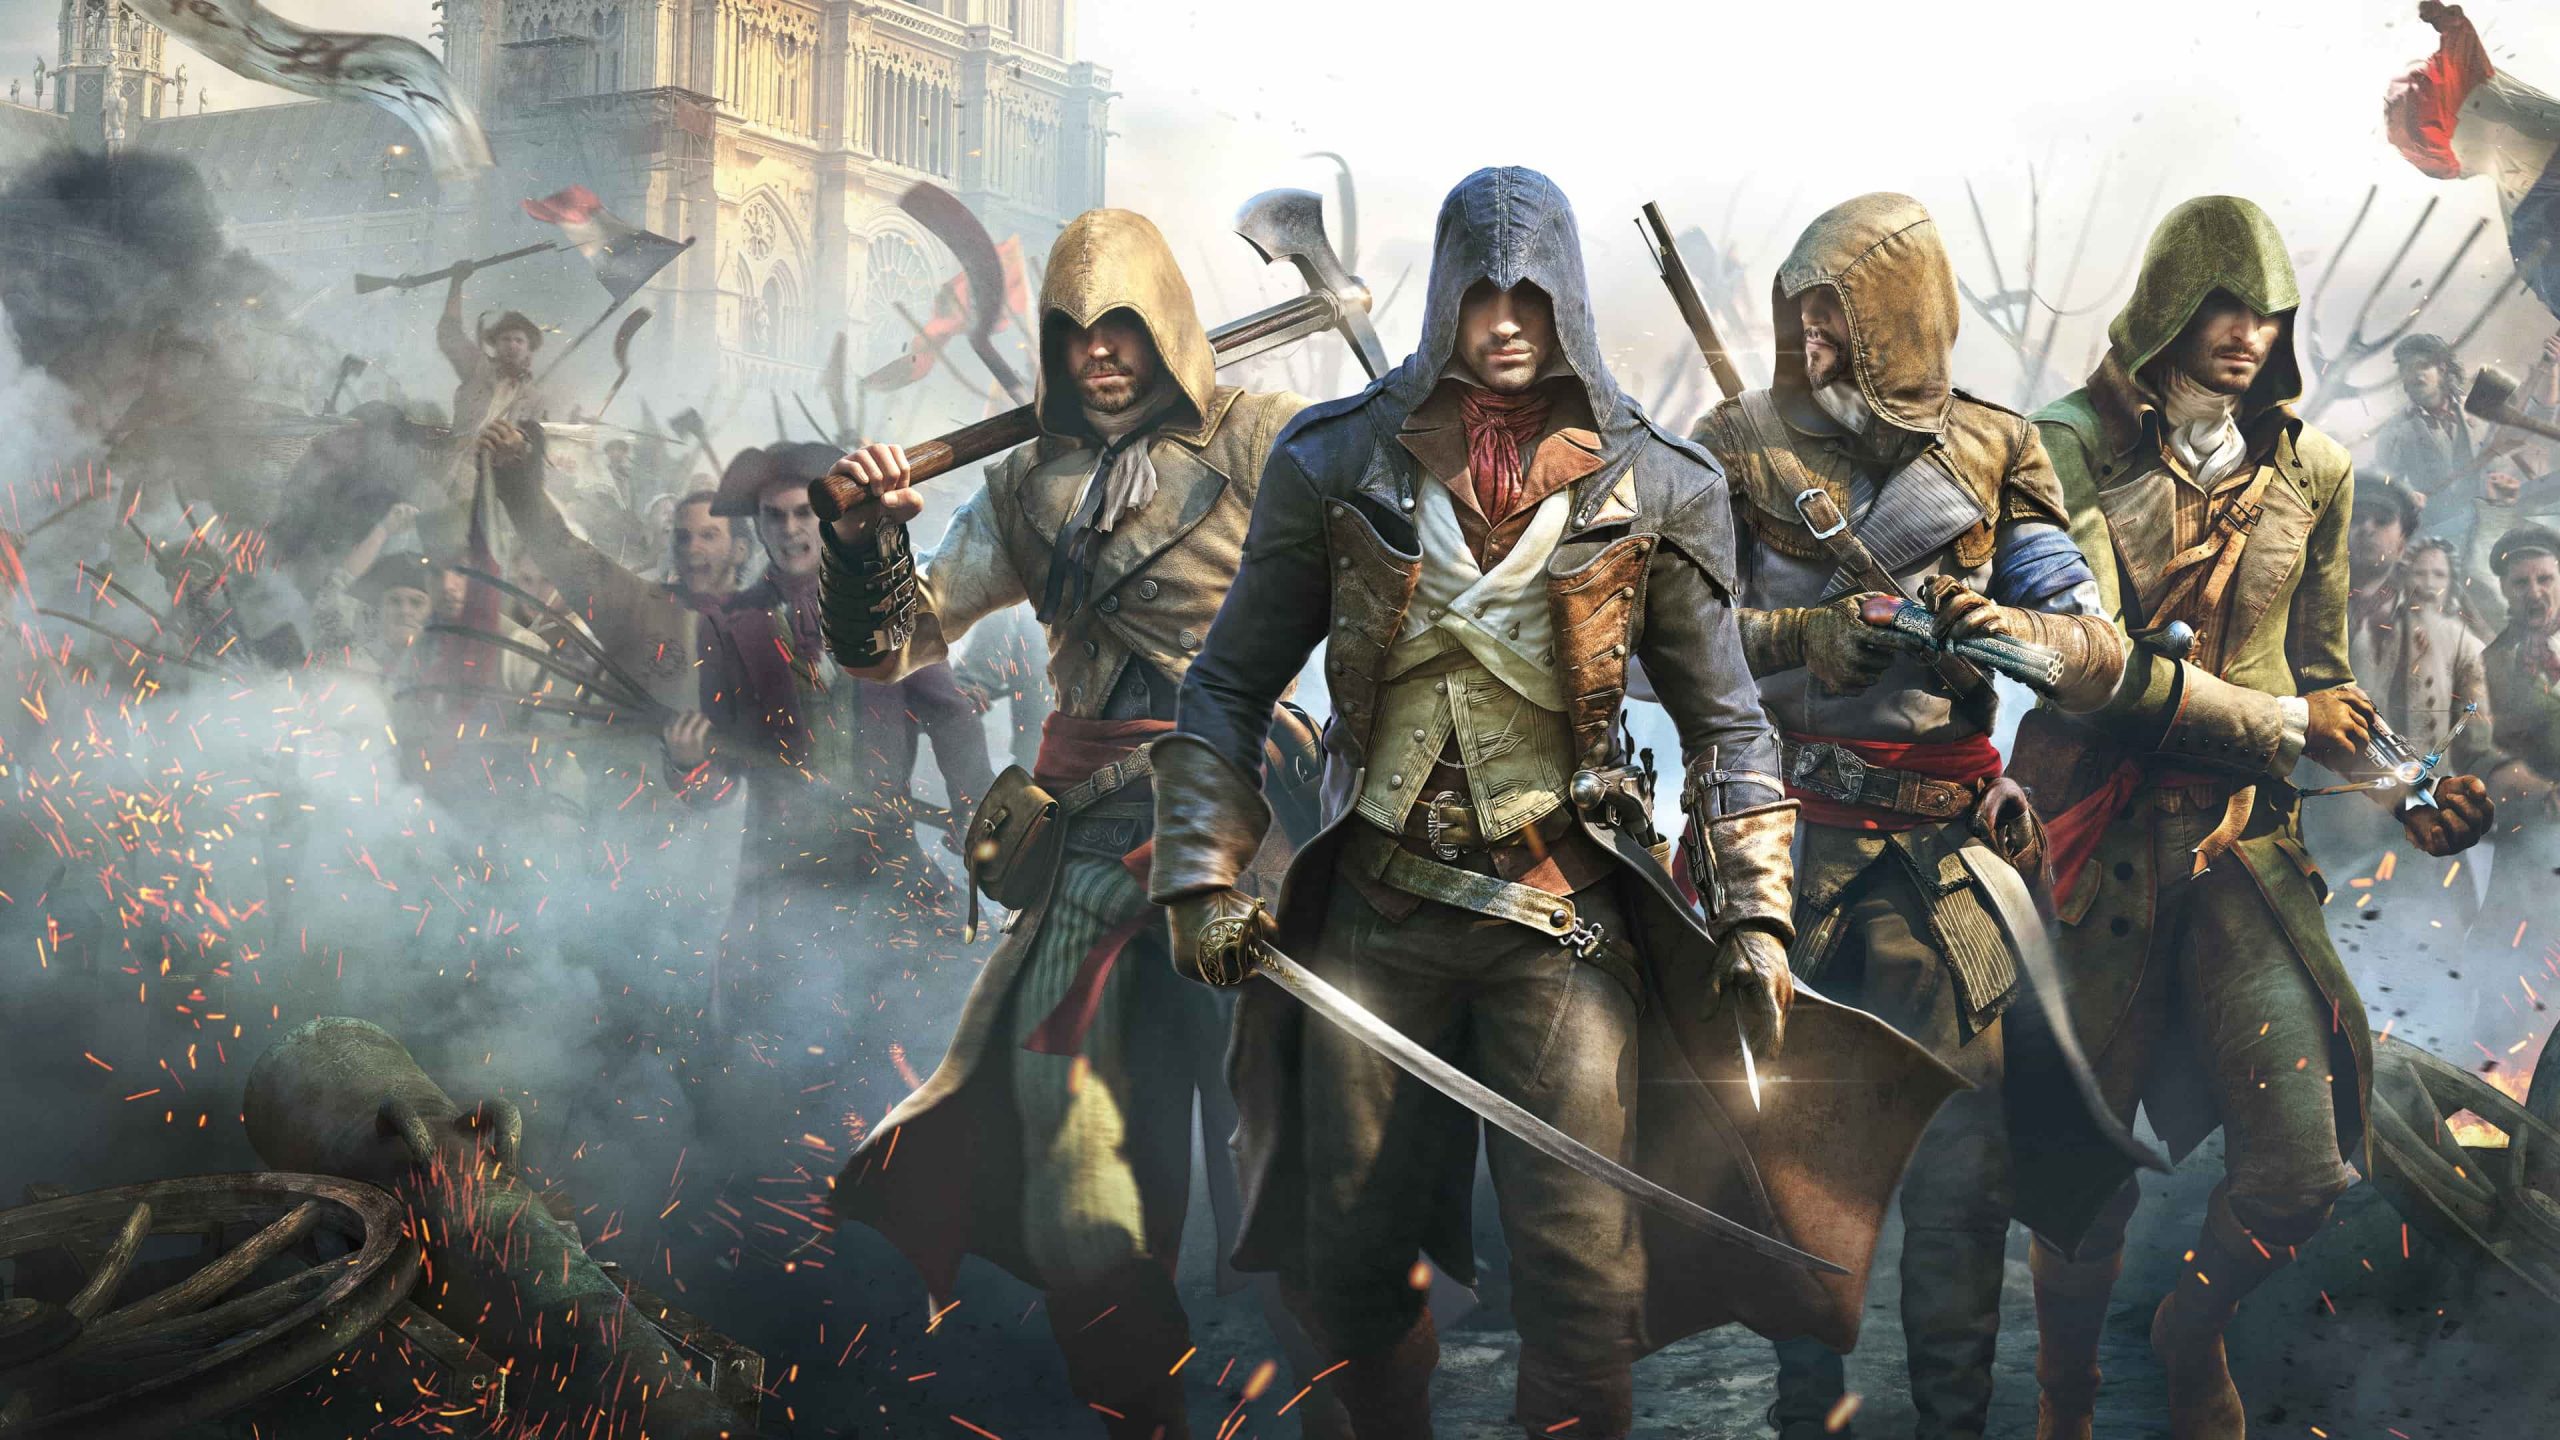 Best Gear Build In Assassin's Creed Unity